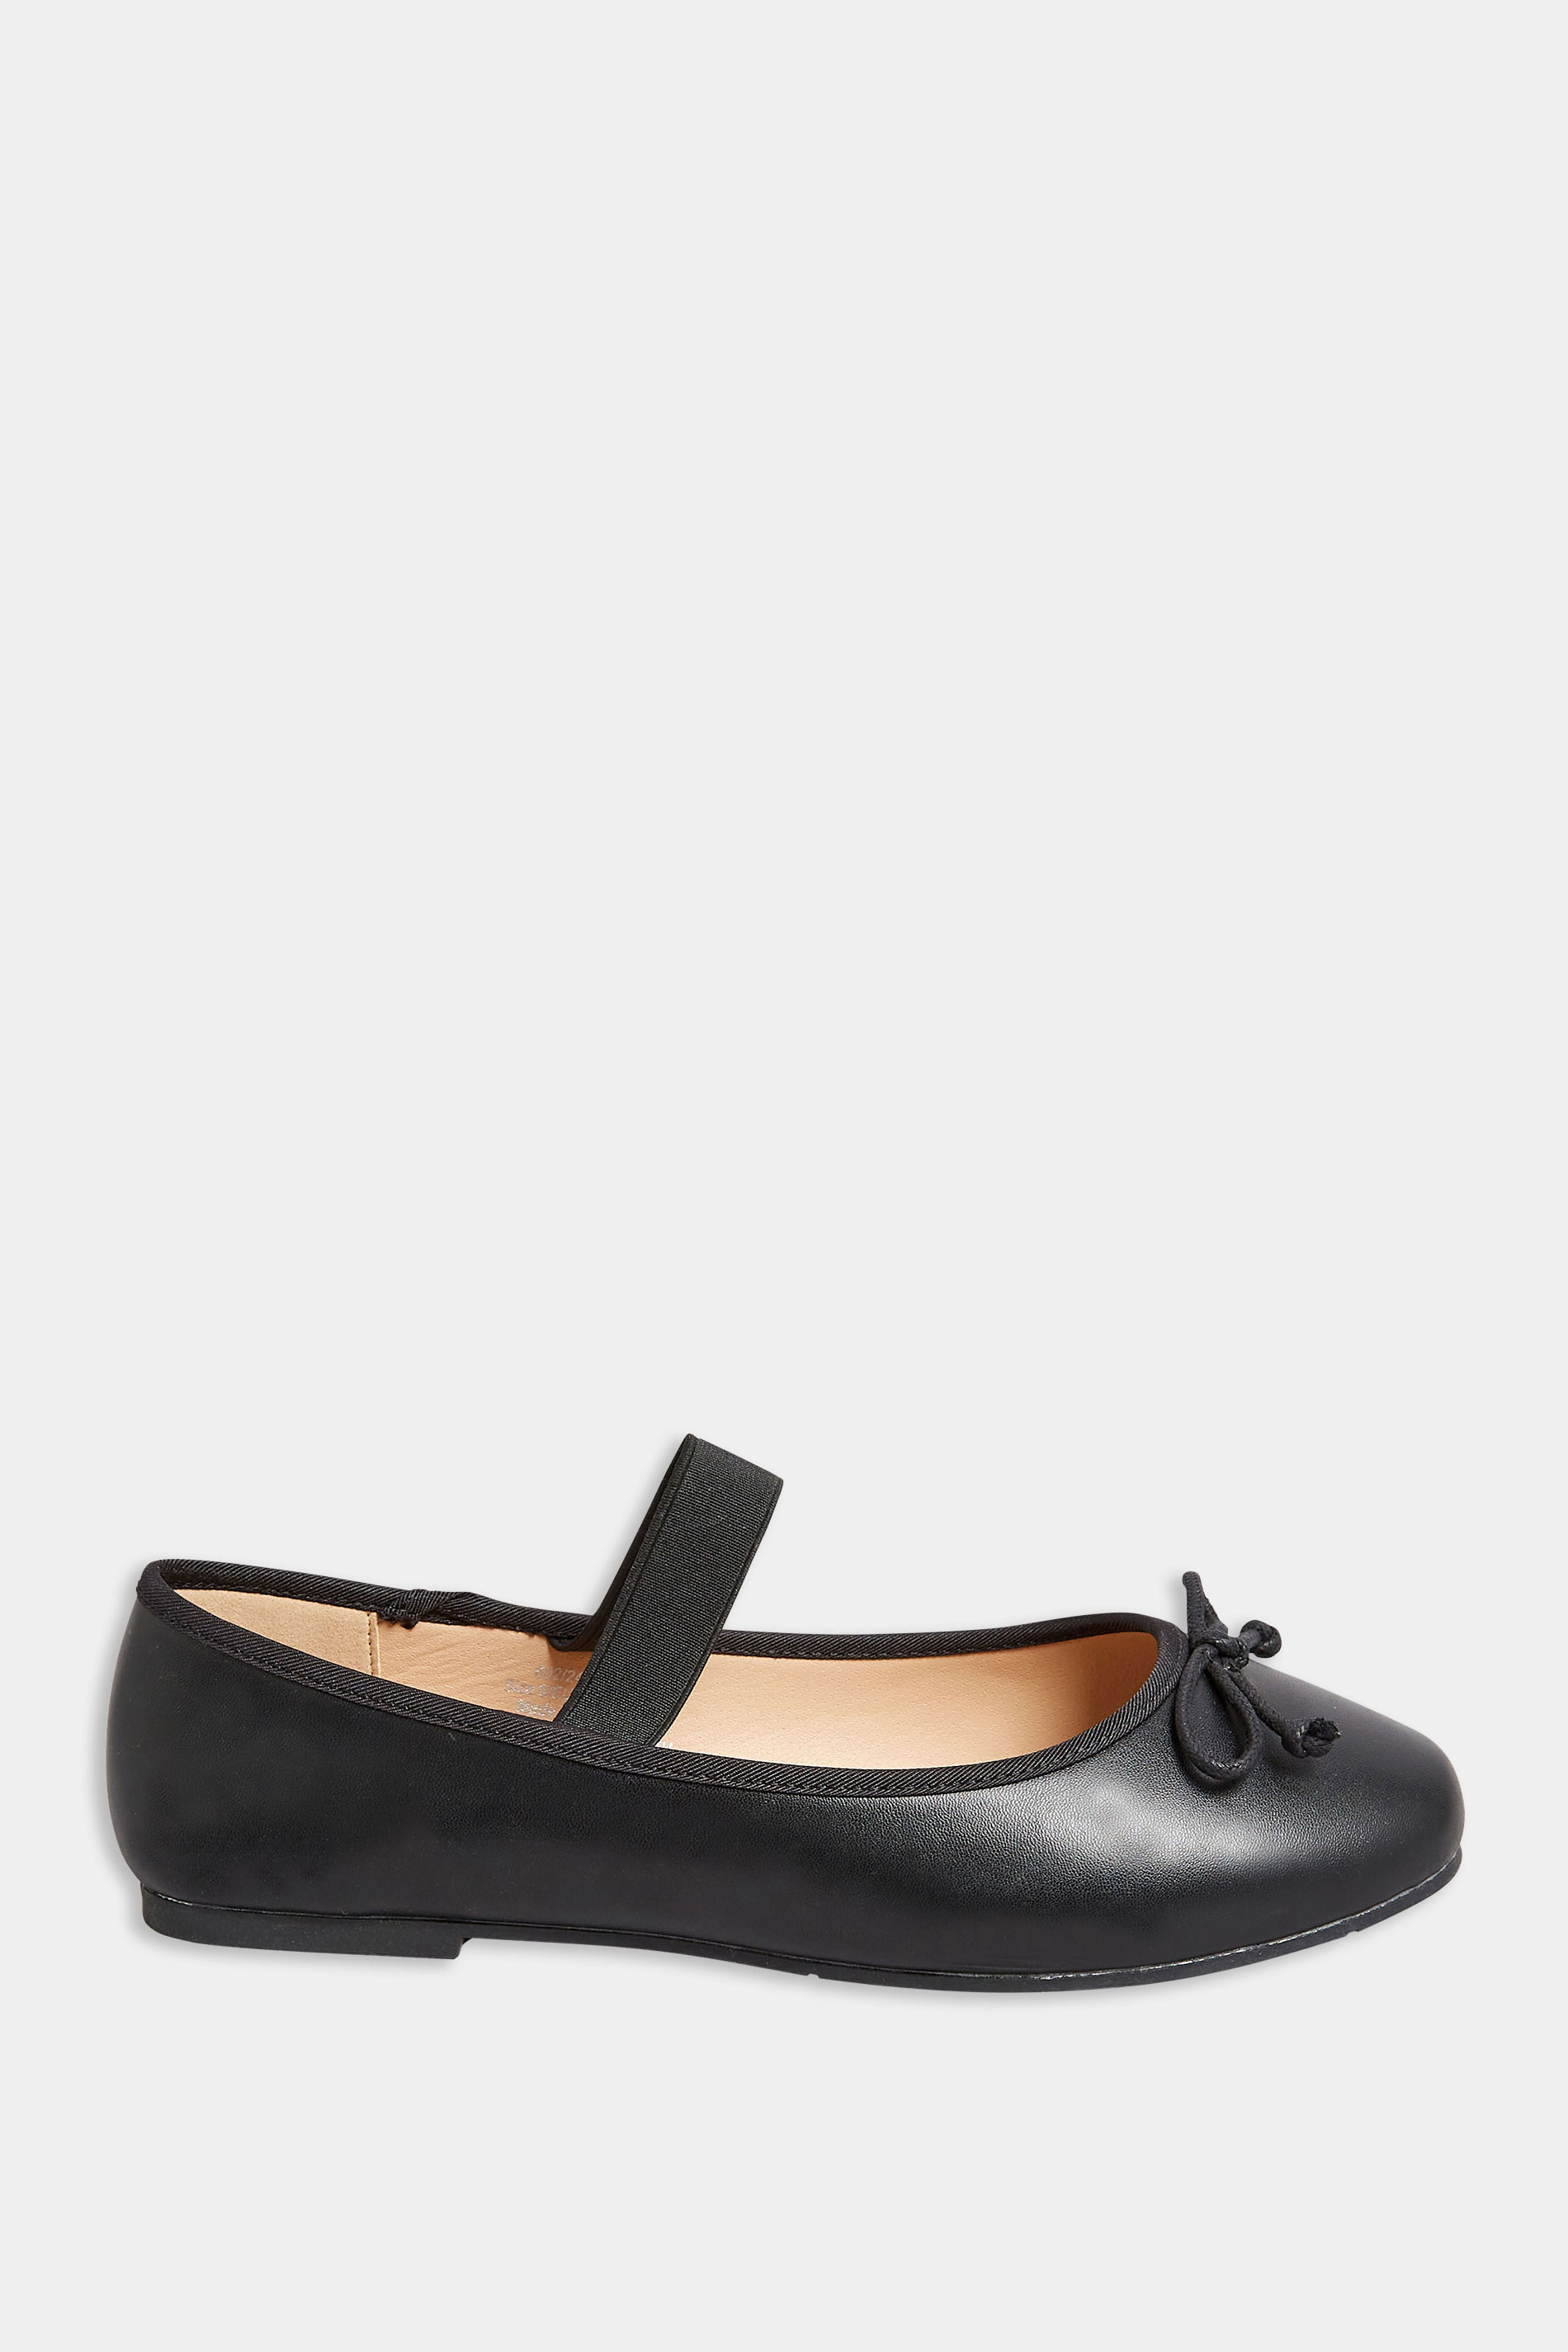 Black Mary Jane Ballerina Pumps In Wide E Fit & Extra Wide EEE Fit | Yours Clothing 3